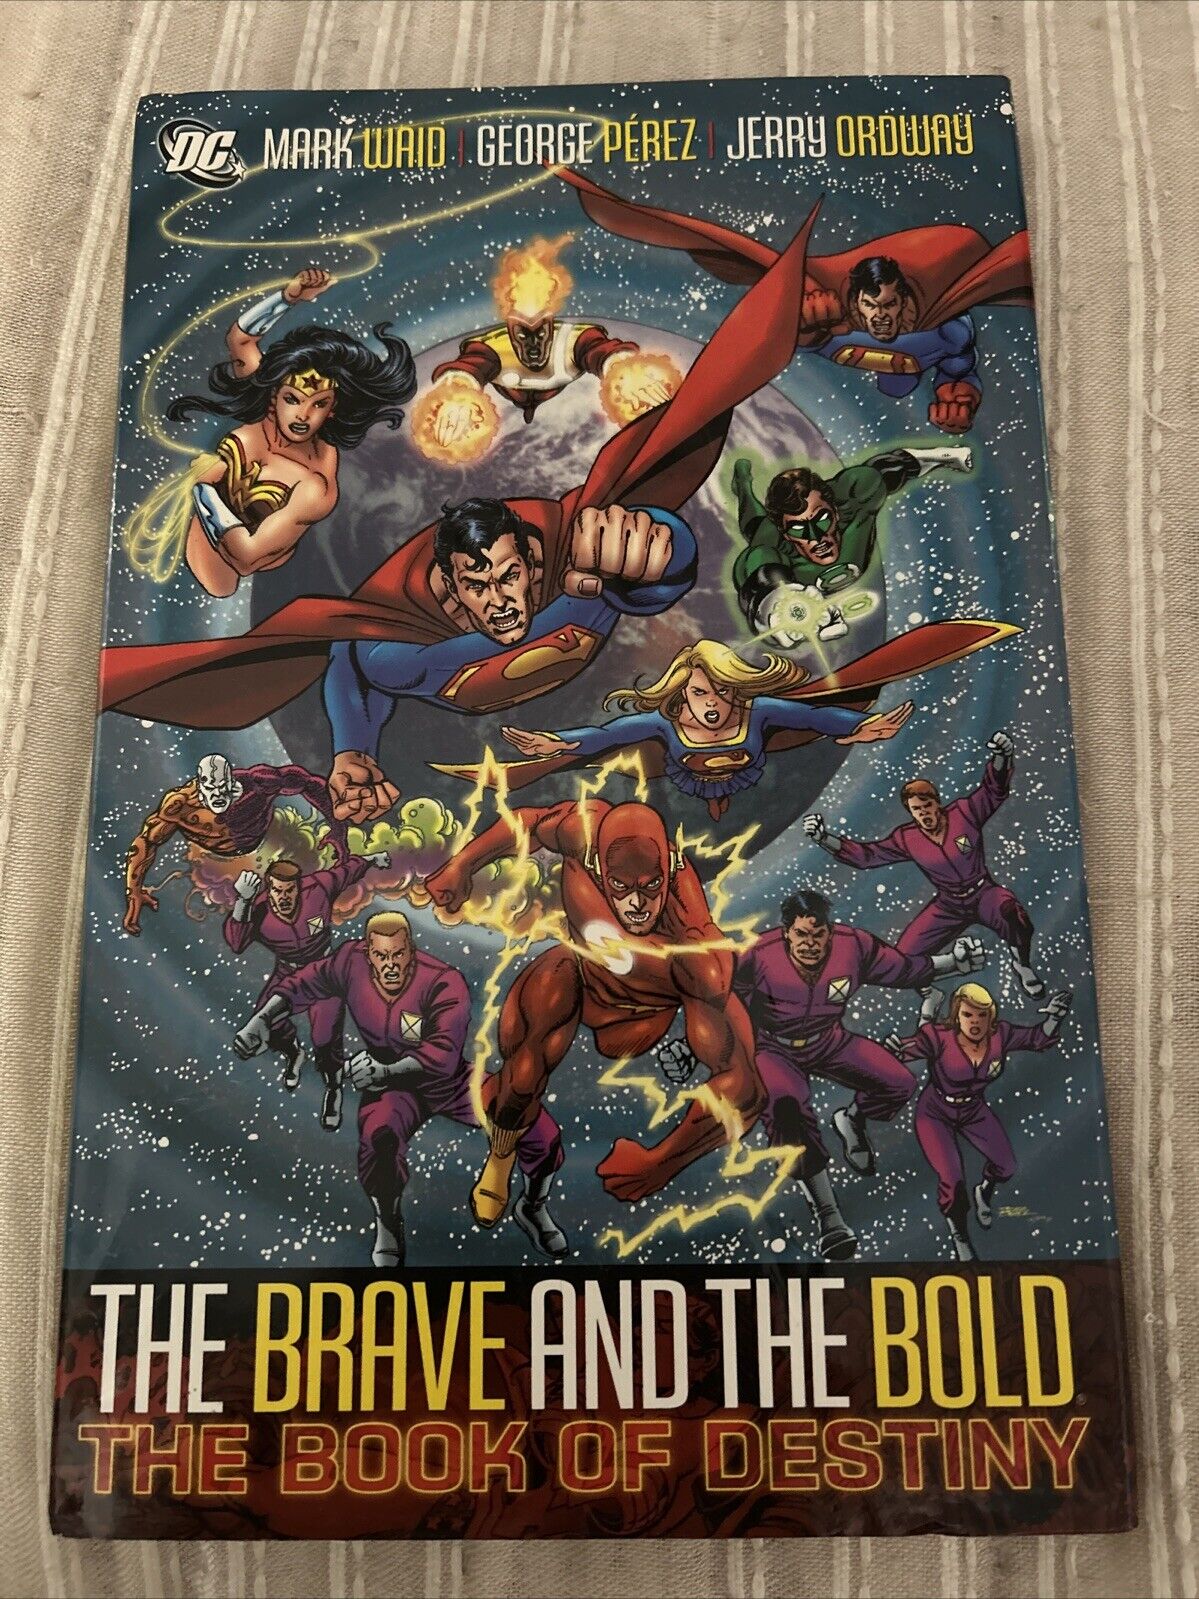 The Brave and the Bold #2 (DC Comics October 2008)